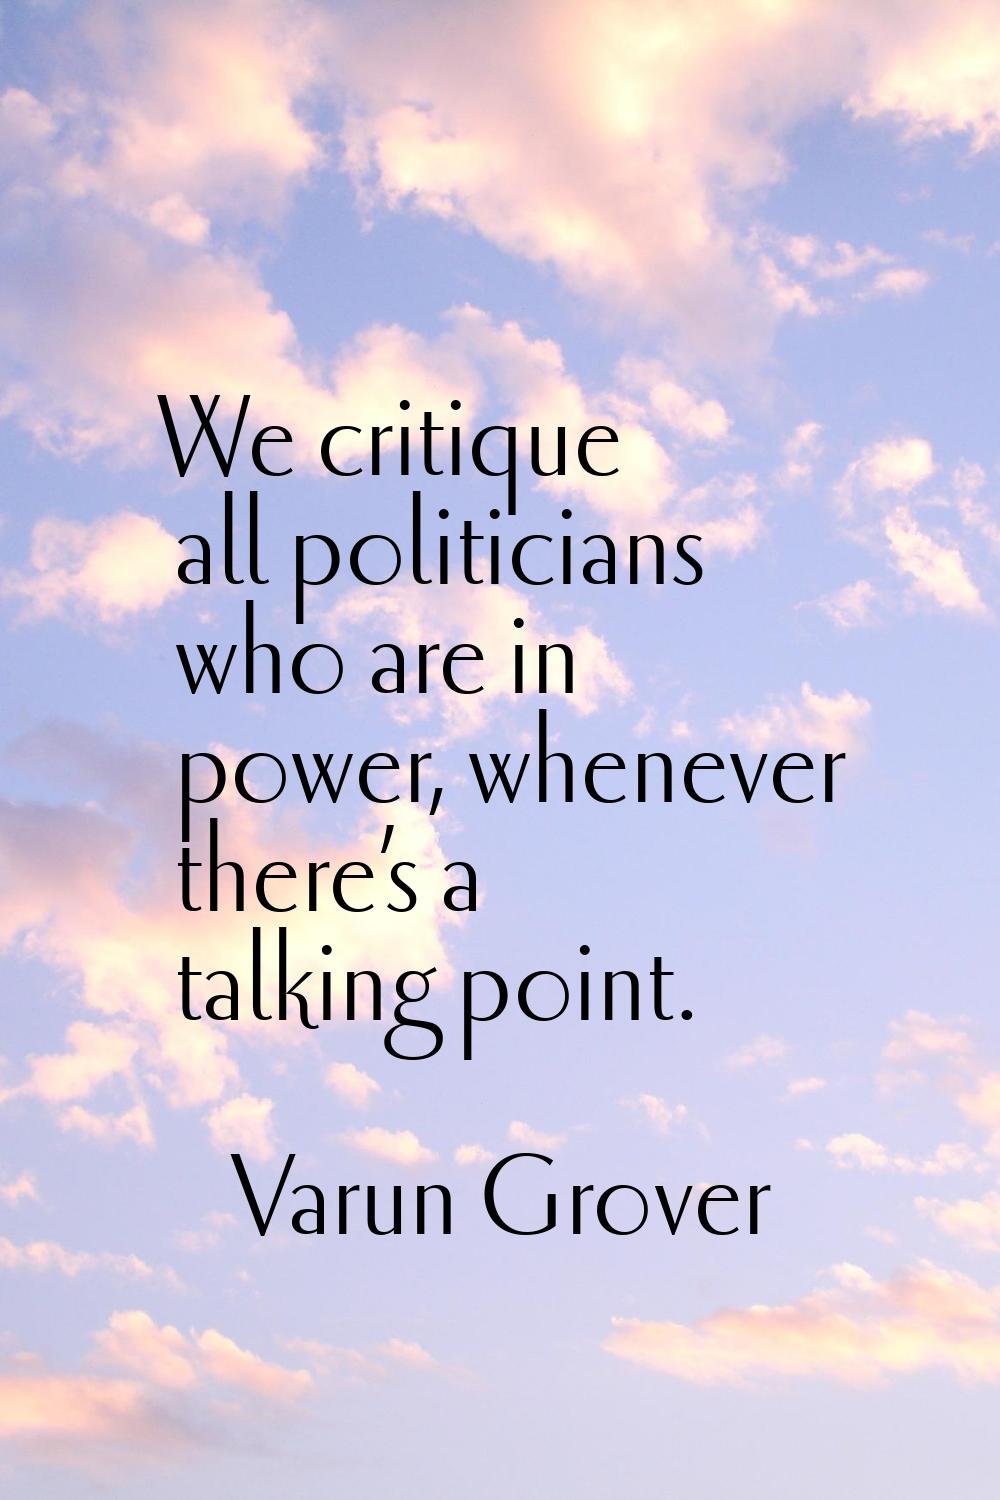 We critique all politicians who are in power, whenever there’s a talking point.